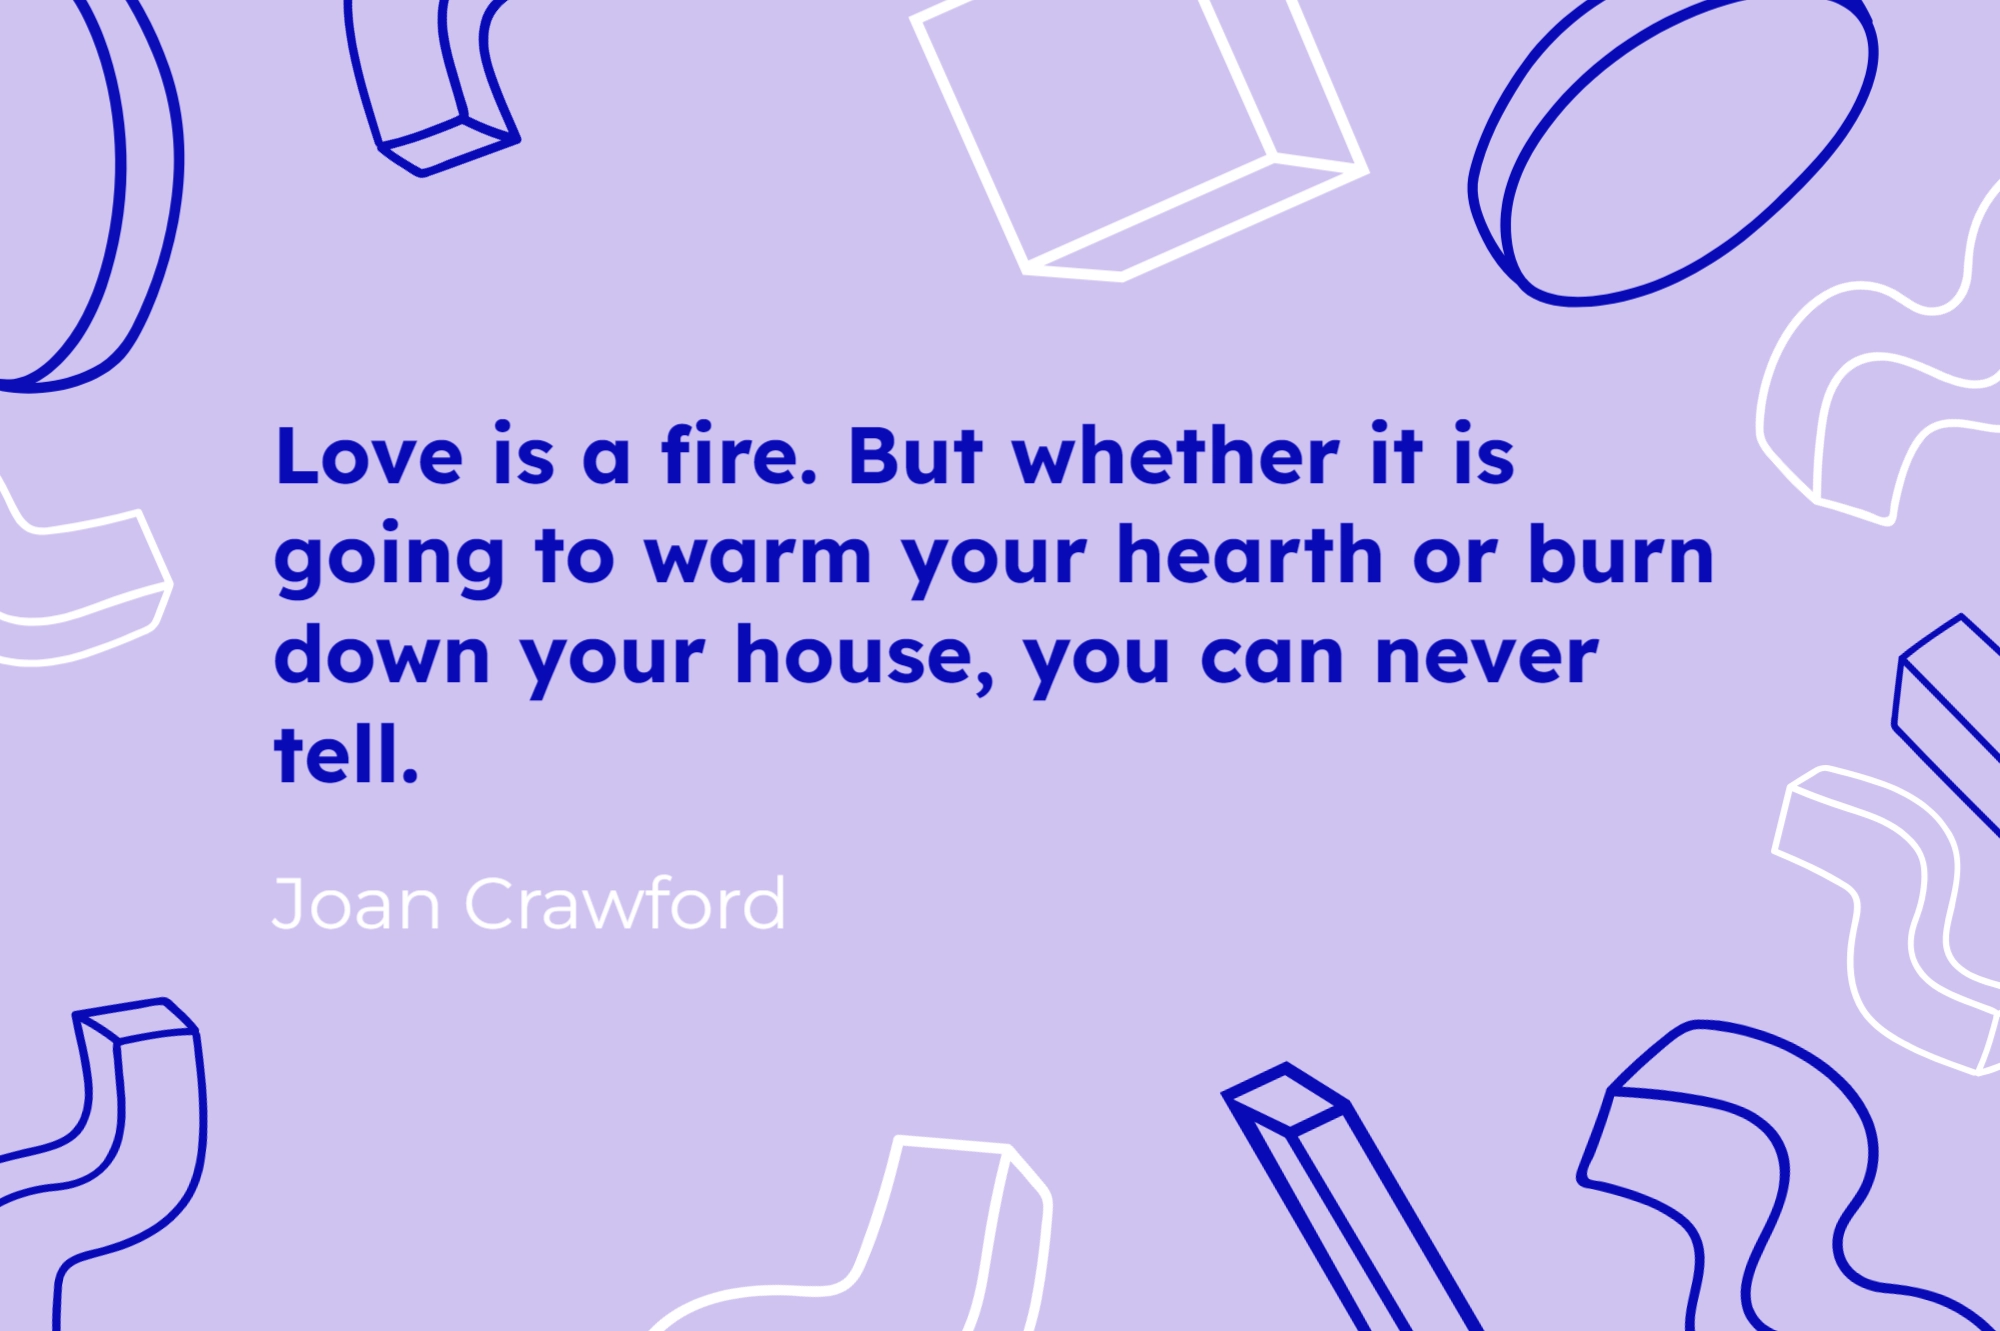 Quotes Love Is A Fire But Whether It Is Going To Warm Your Hearth Or Burn Down Your House